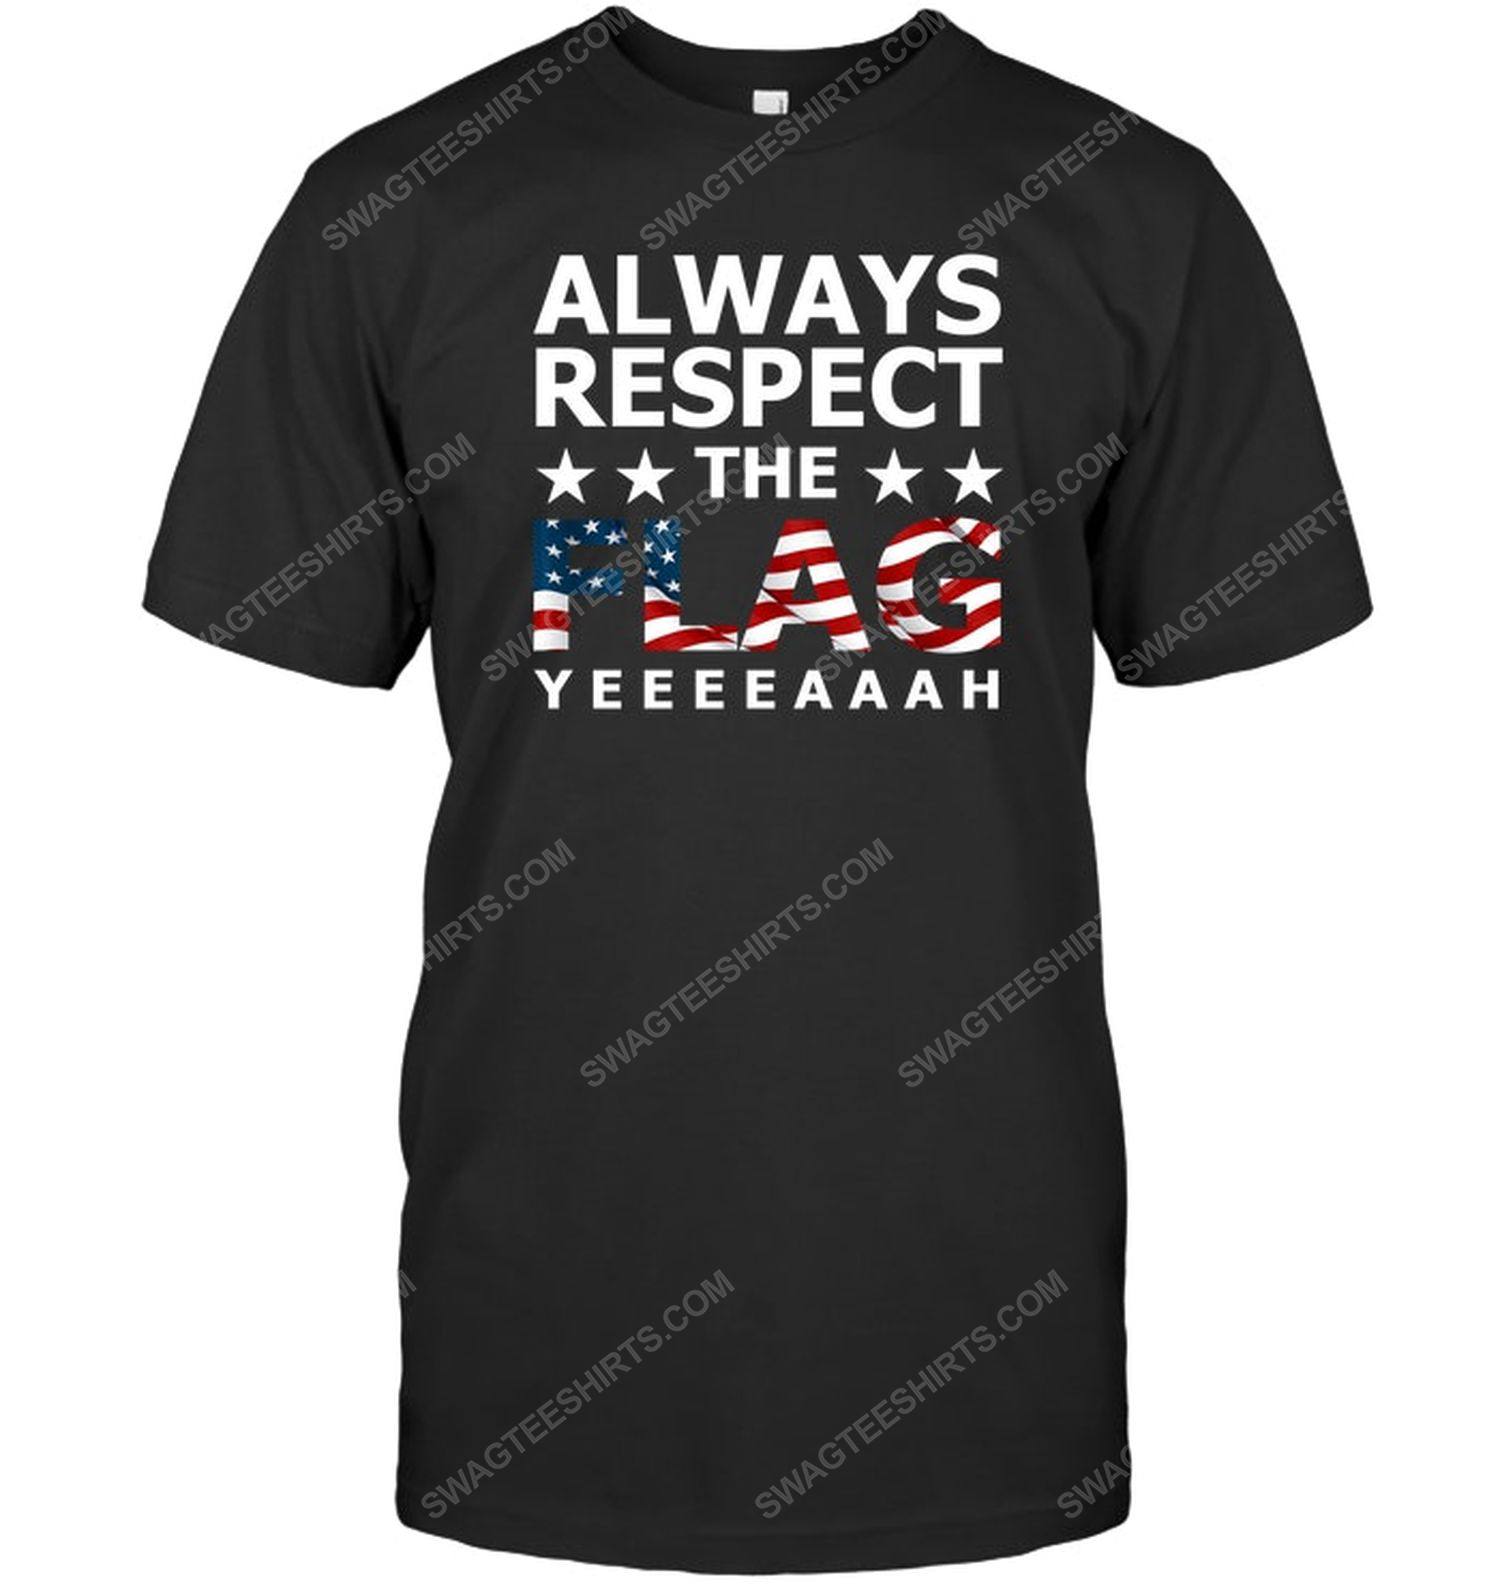 Always respect the flag yeah political tshirt